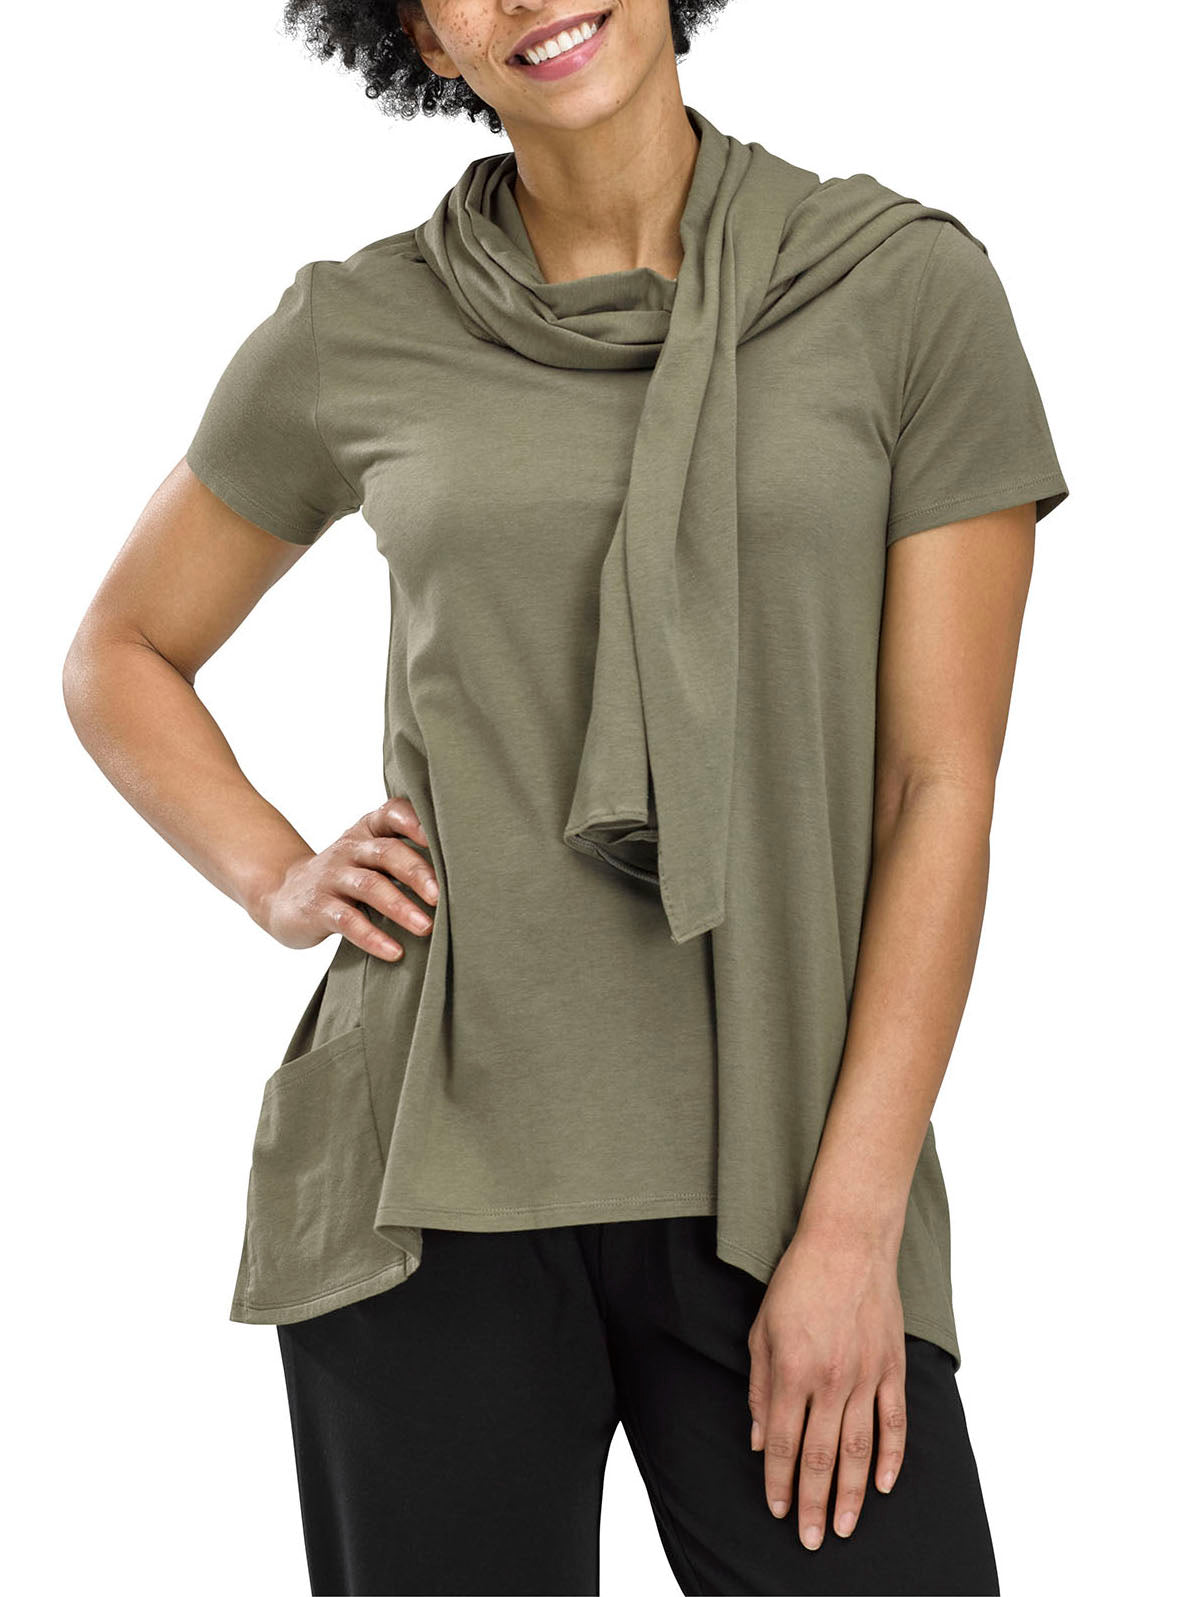 Perfect Protect Short Sleeve Scarf Tee Shirt